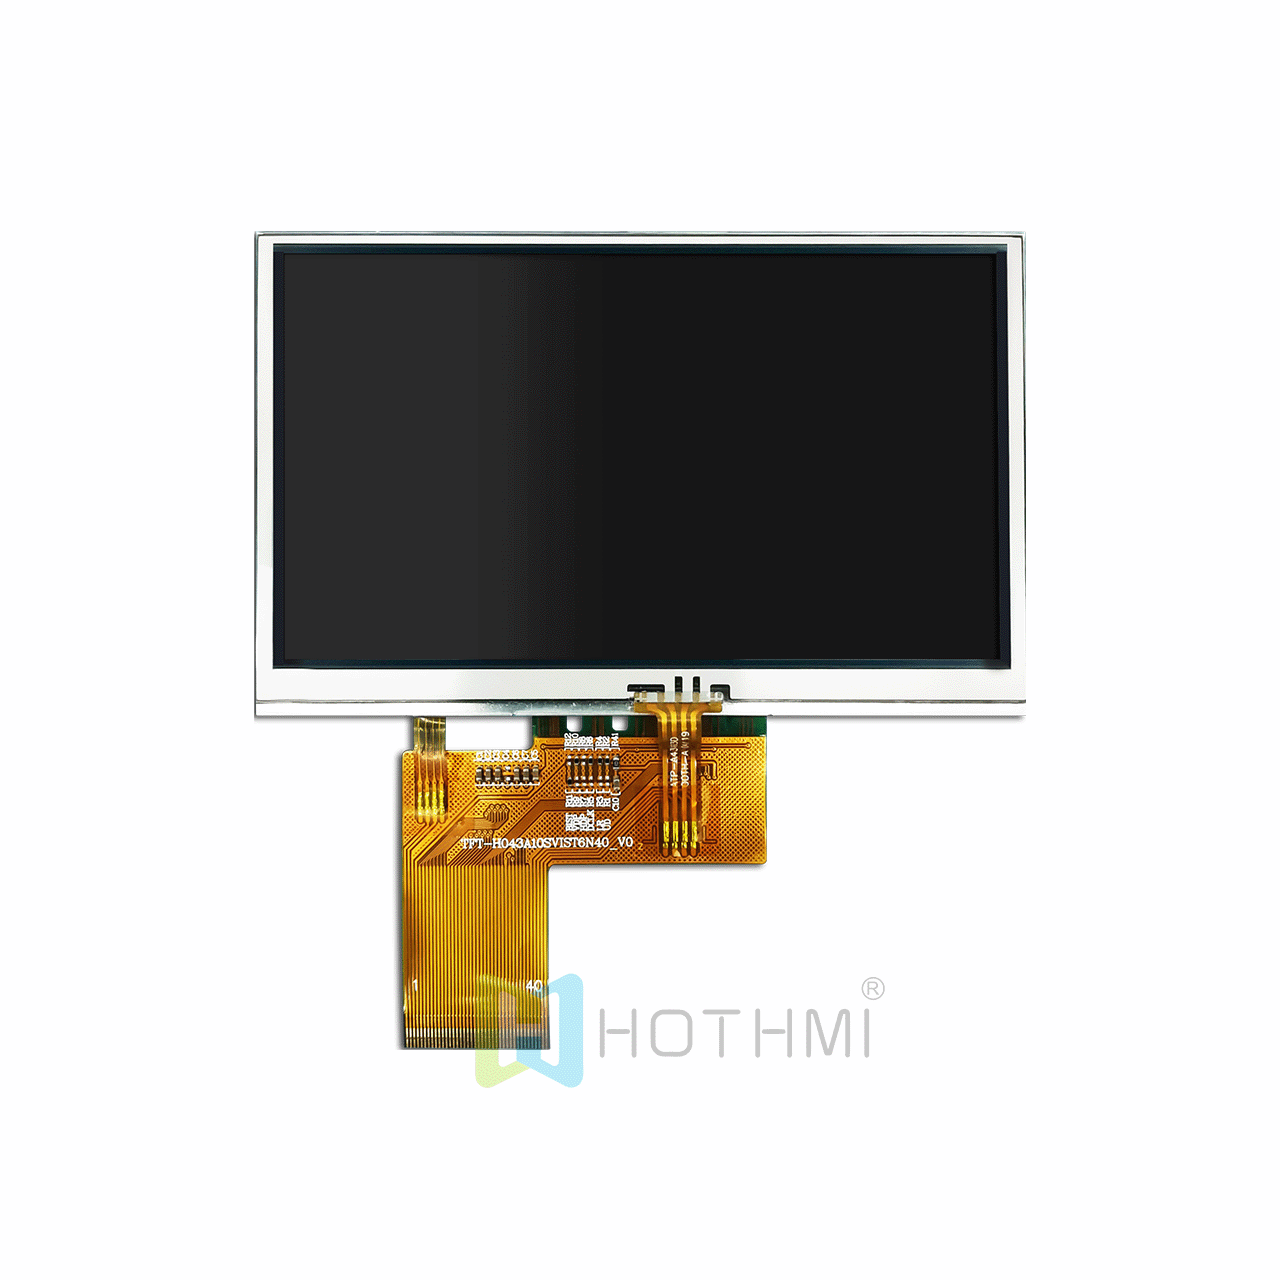 4.3 inch TFT LCD display module resistive touch 800x480 dot matrix wide temperature IPS full angle sunlight readable TTL ST7262 compatible with industrial computer